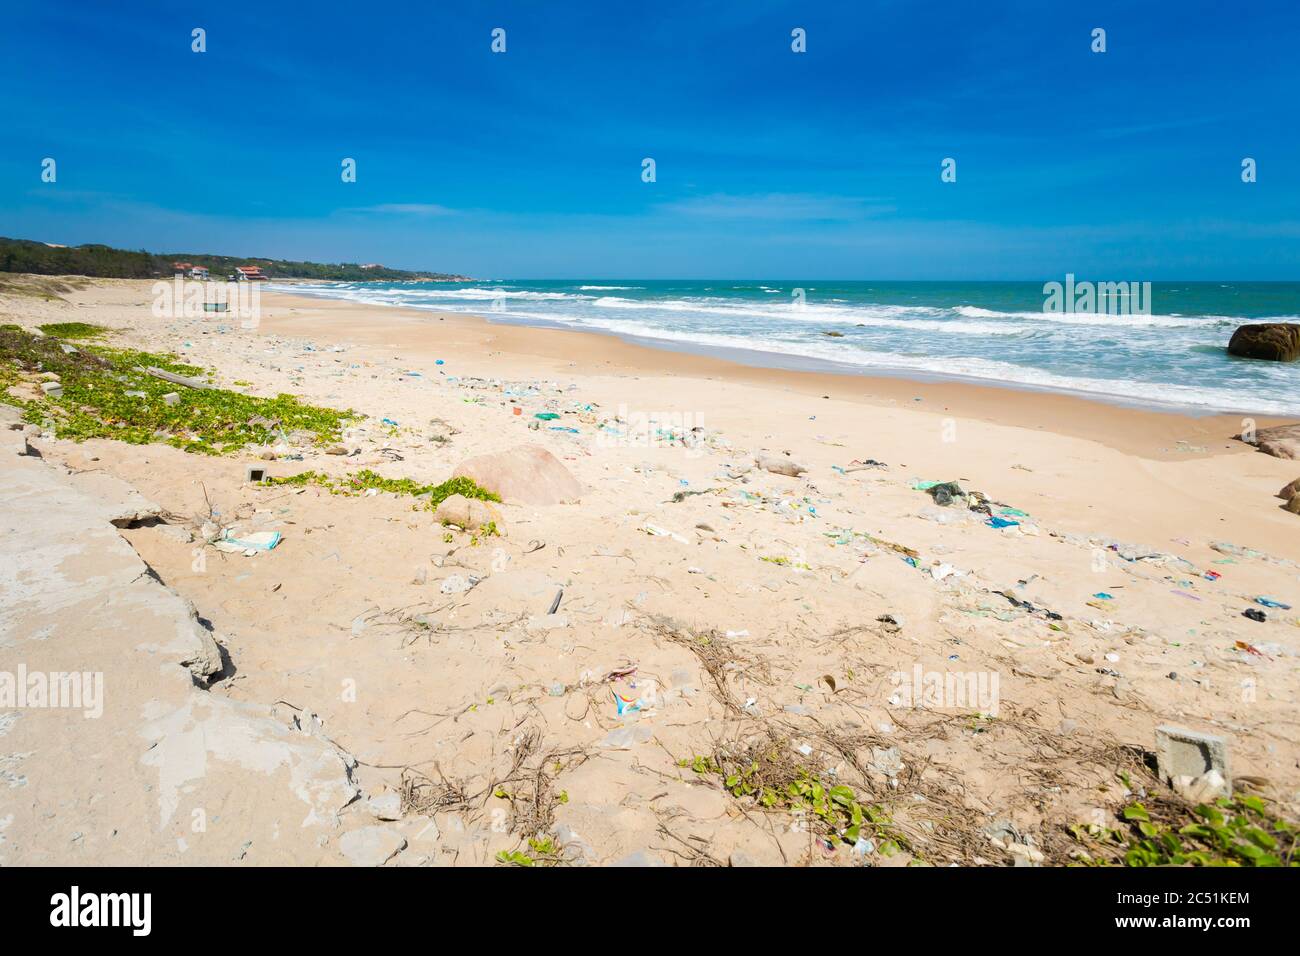 Sad picture with lots of rubbish in natural place. Summer seascape with Ke Ga Lighthouse in Vietnam. Landscape taken from the beach with blue sky on t Stock Photo